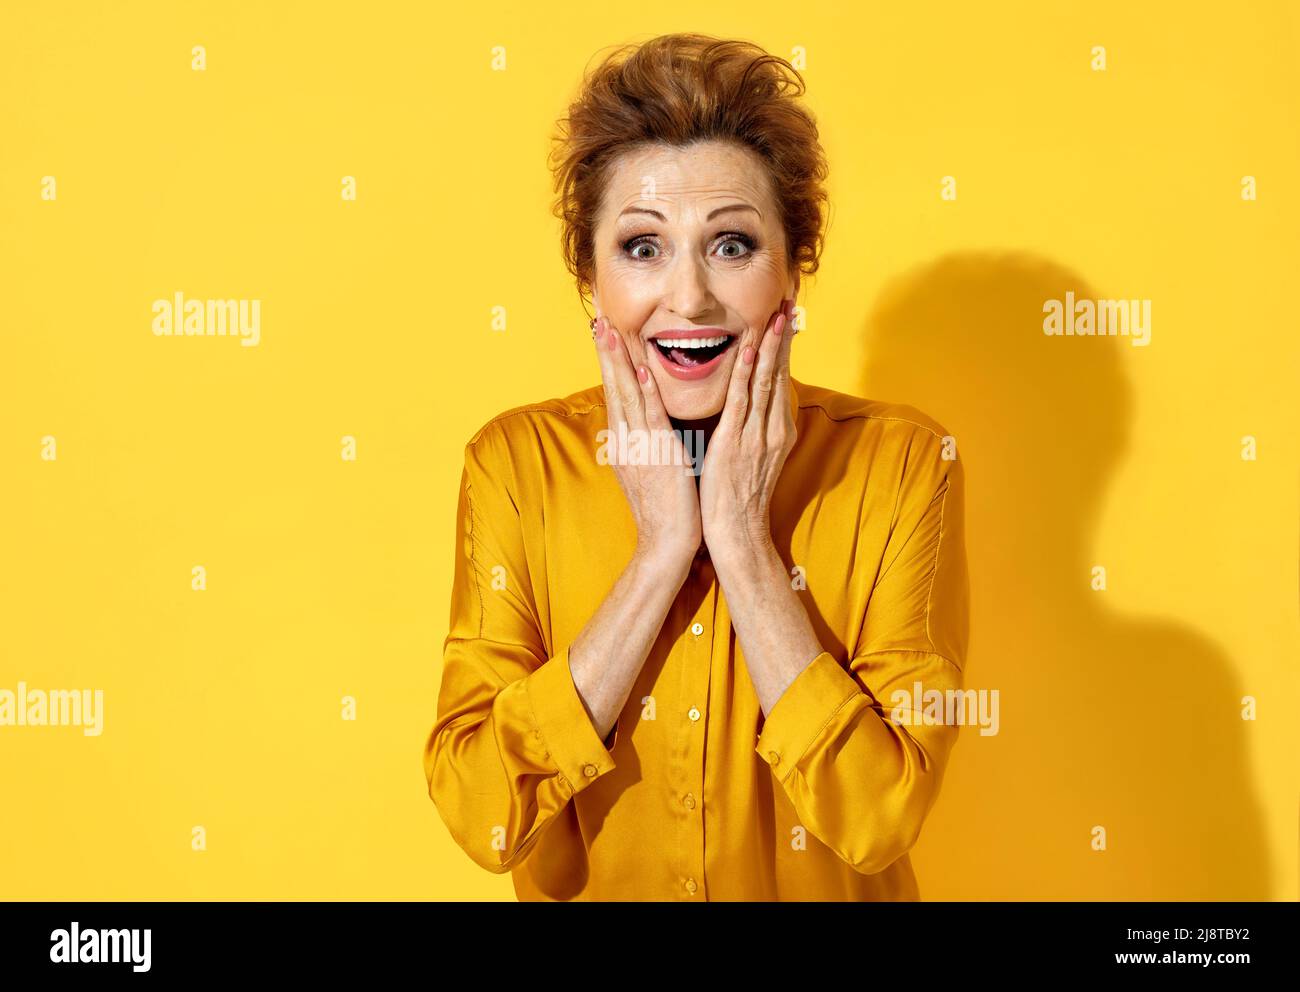 Positive smiling woman with eyes full of happiness, holds hands near her face. Photo of attractive elderly woman in yellow shirt on yellow background. Stock Photo